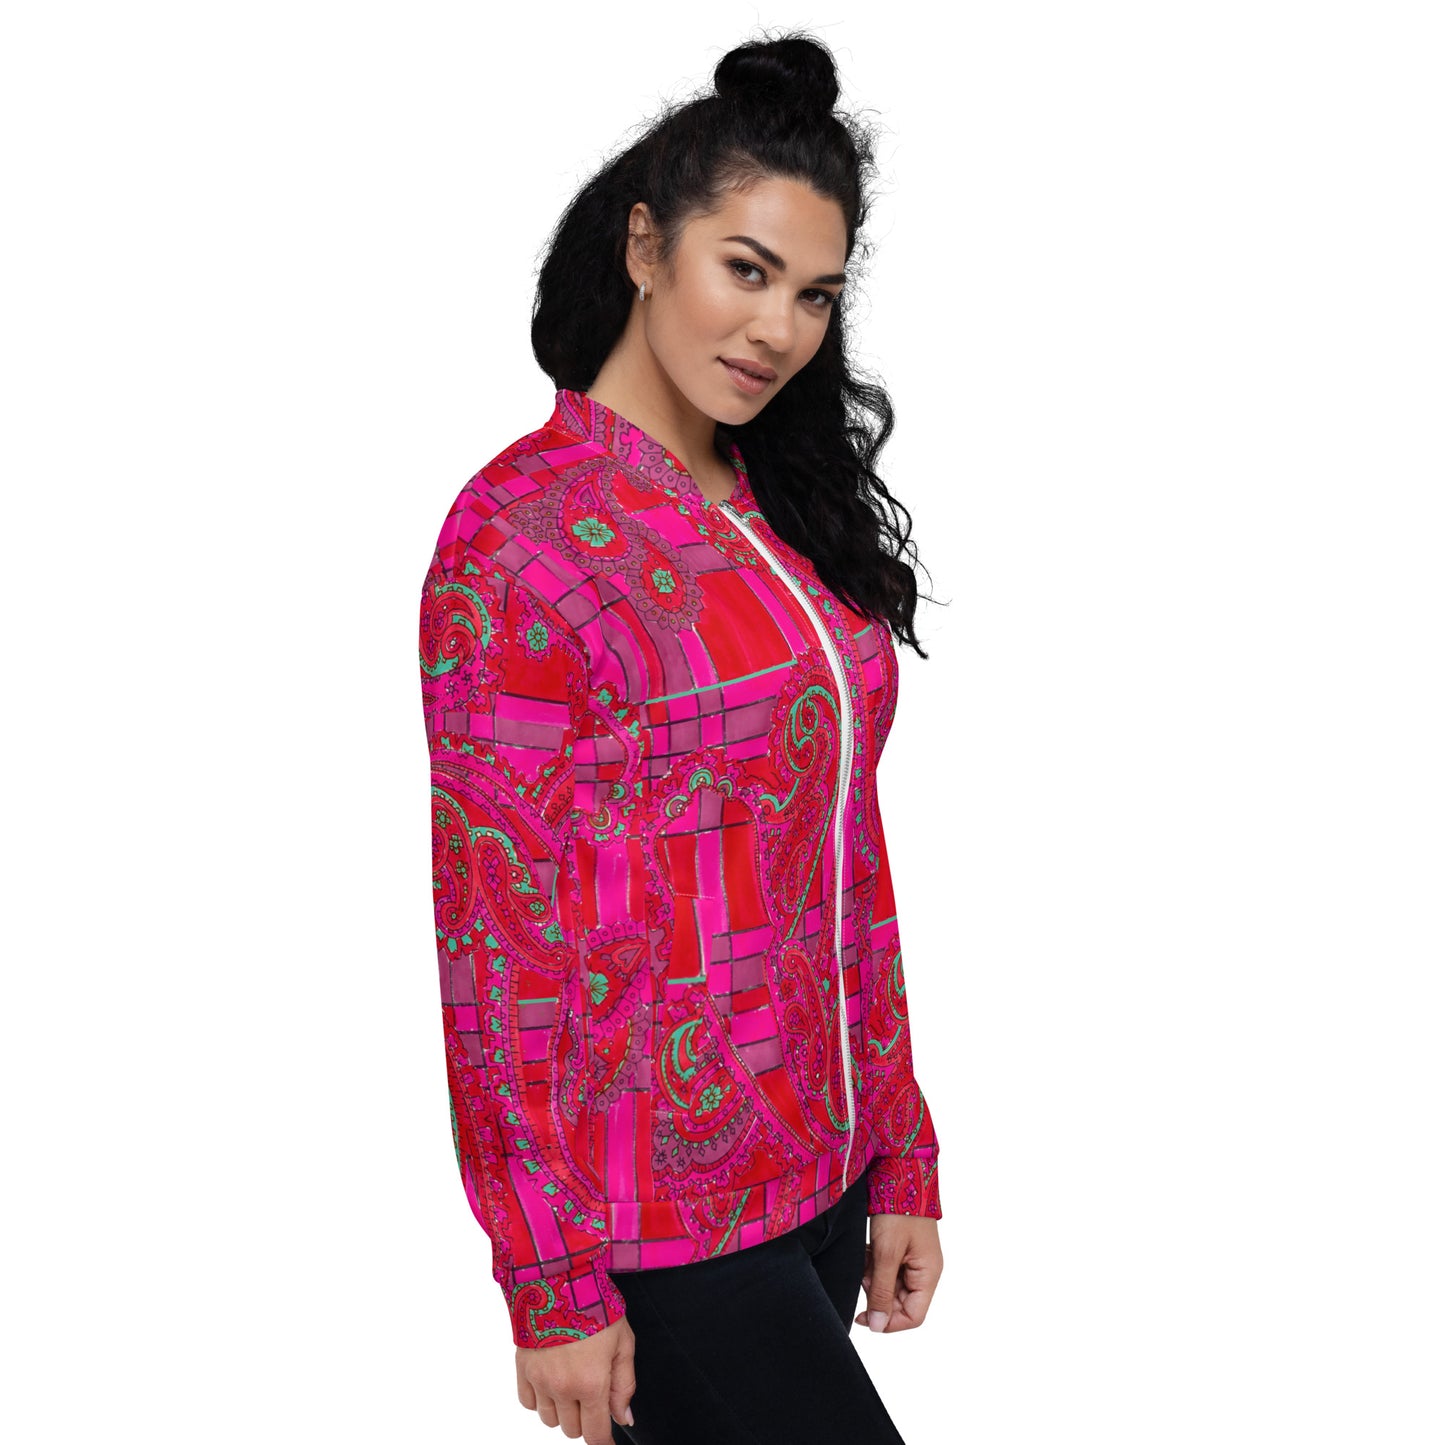 Recycled Unisex Bomber Jacket - Bright Fuscia and Red Poppy Paisley on Plaid - Women